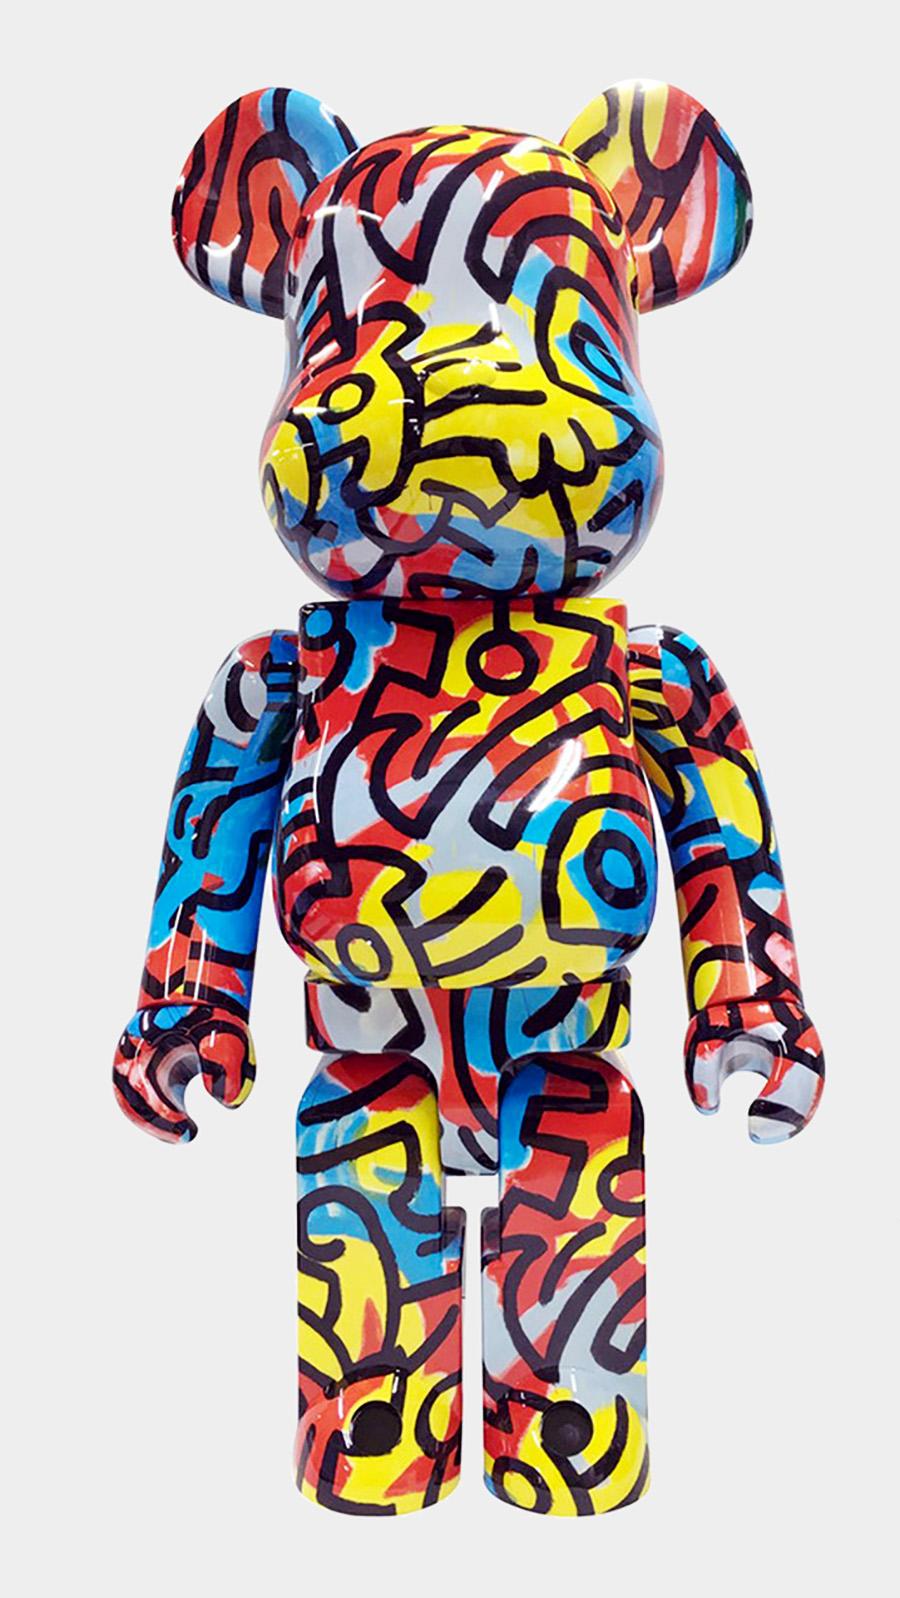 Keith Haring Bearbrick 1000% (Haring DesignerCon BE@RBRICK) - Sculpture by (after) Keith Haring